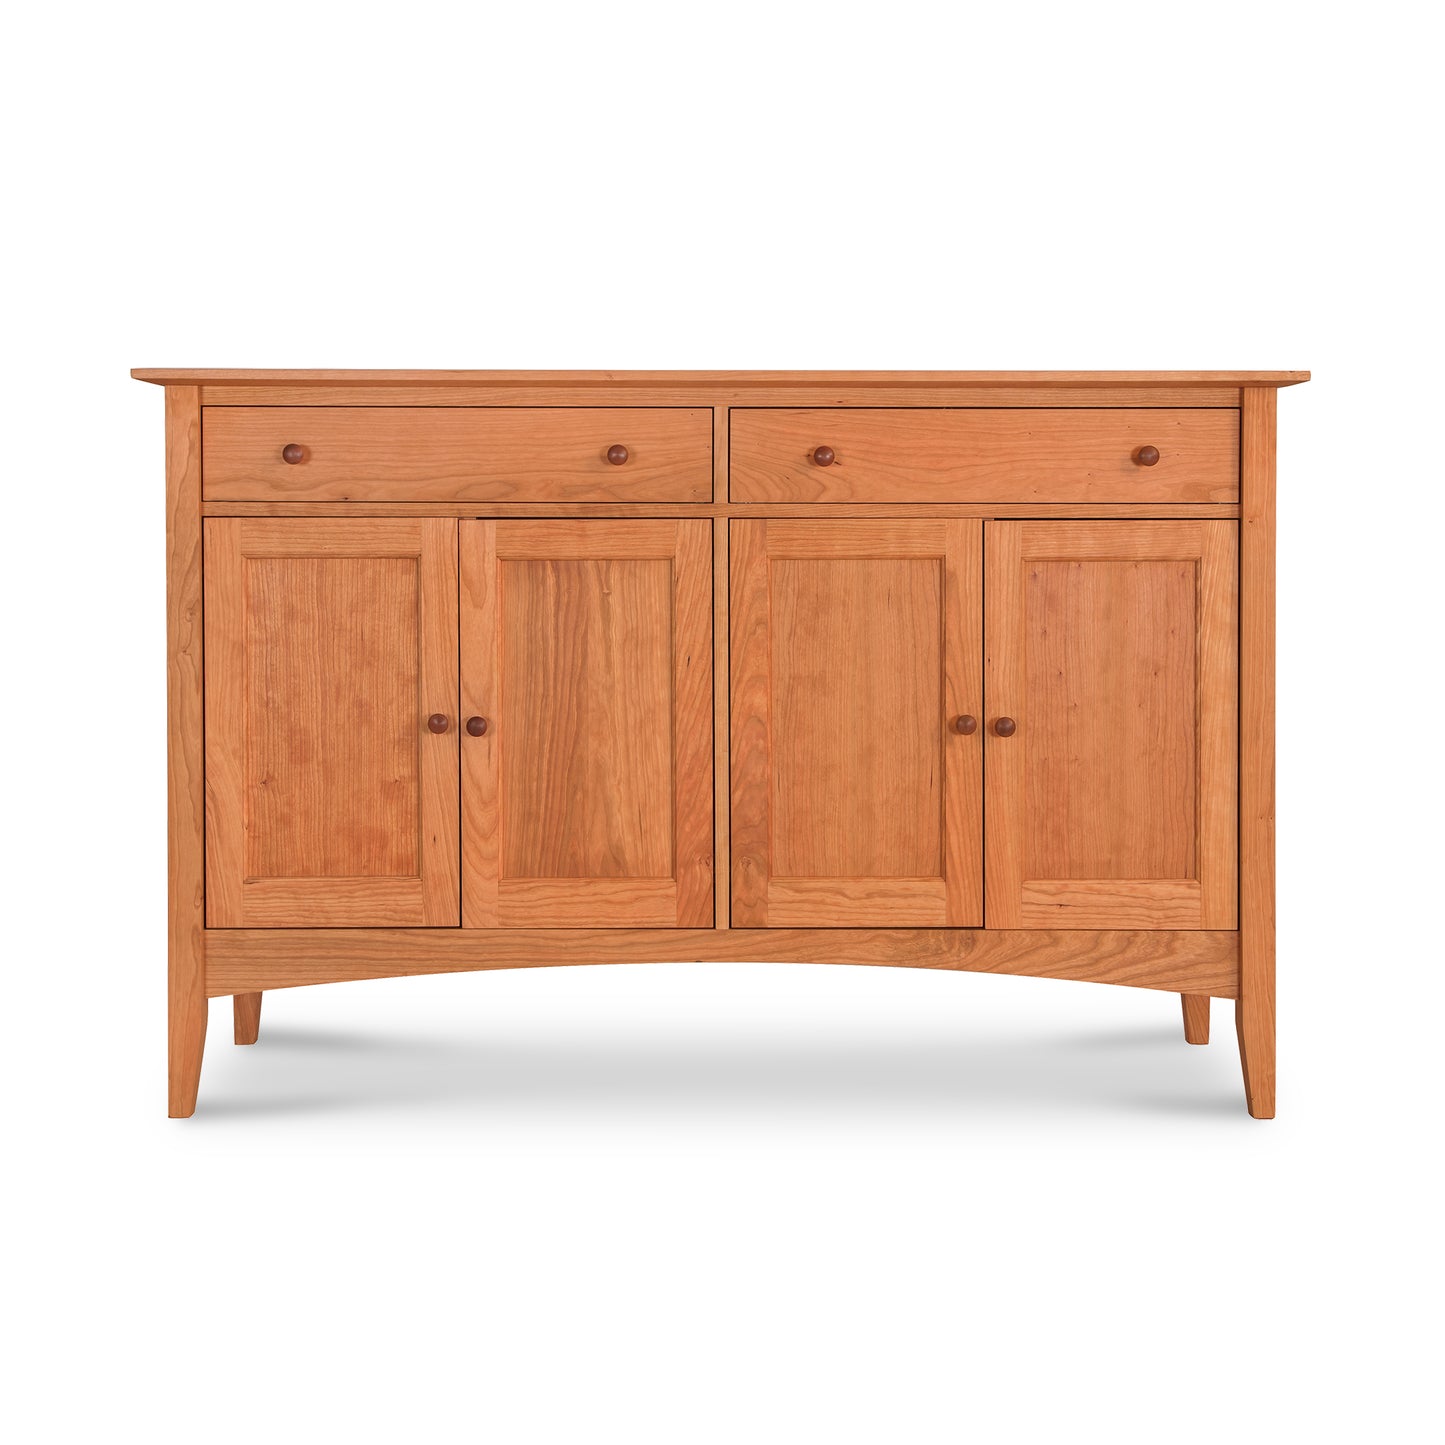 A Maple Corner Woodworks American Shaker Sideboard with three doors and two drawers, isolated on a white background.